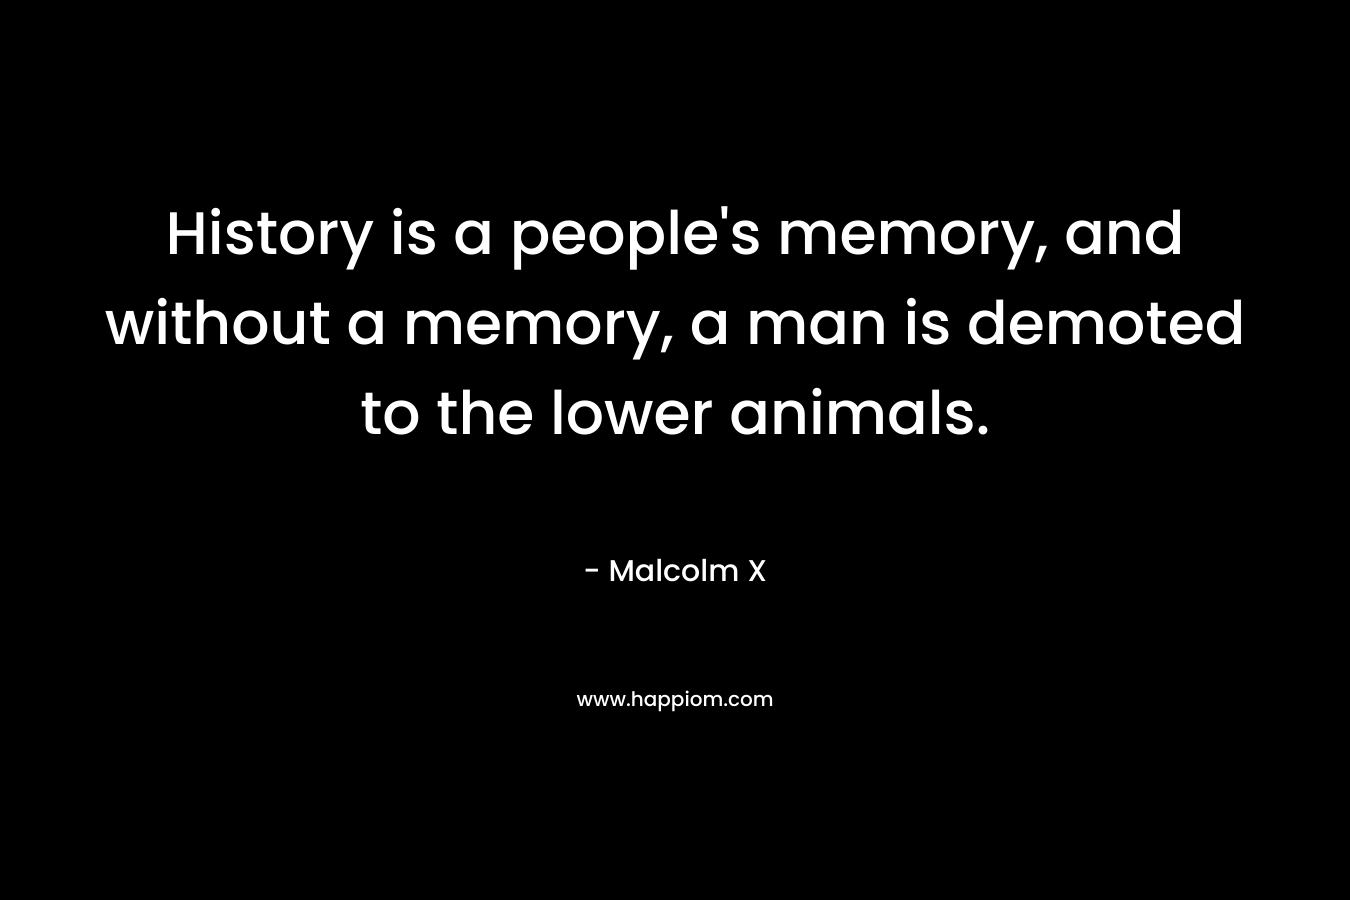 History is a people's memory, and without a memory, a man is demoted to the lower animals.